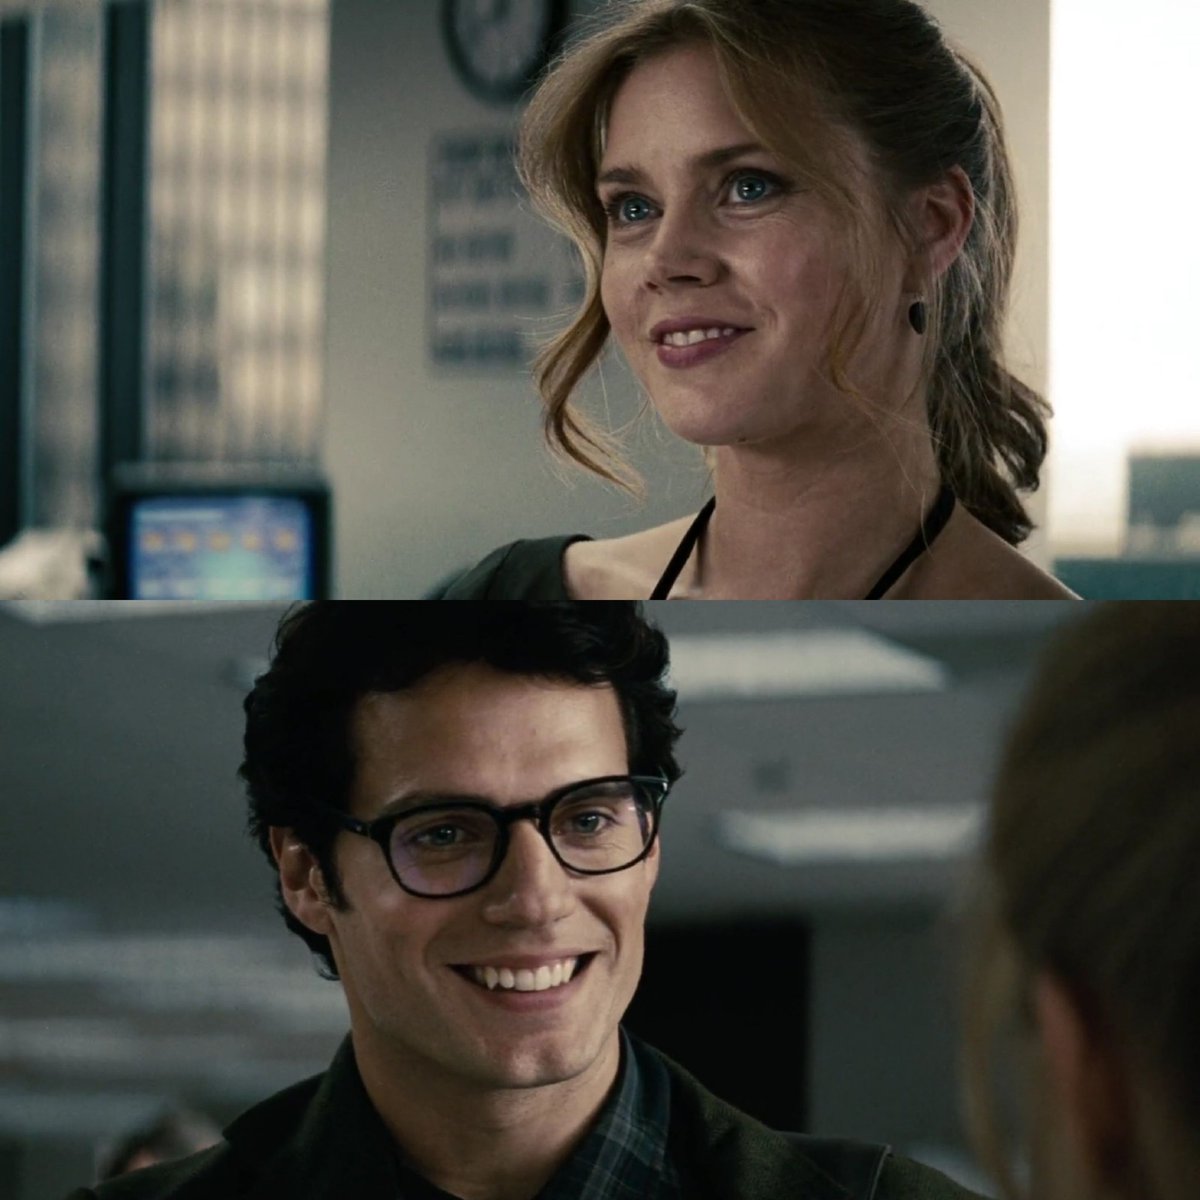 'Hi. Lois Lane. Welcome to the planet.'
'Glad to be here, Lois.' 
#ManOfSteel10Years 
#RestoreTheSnyderVerse